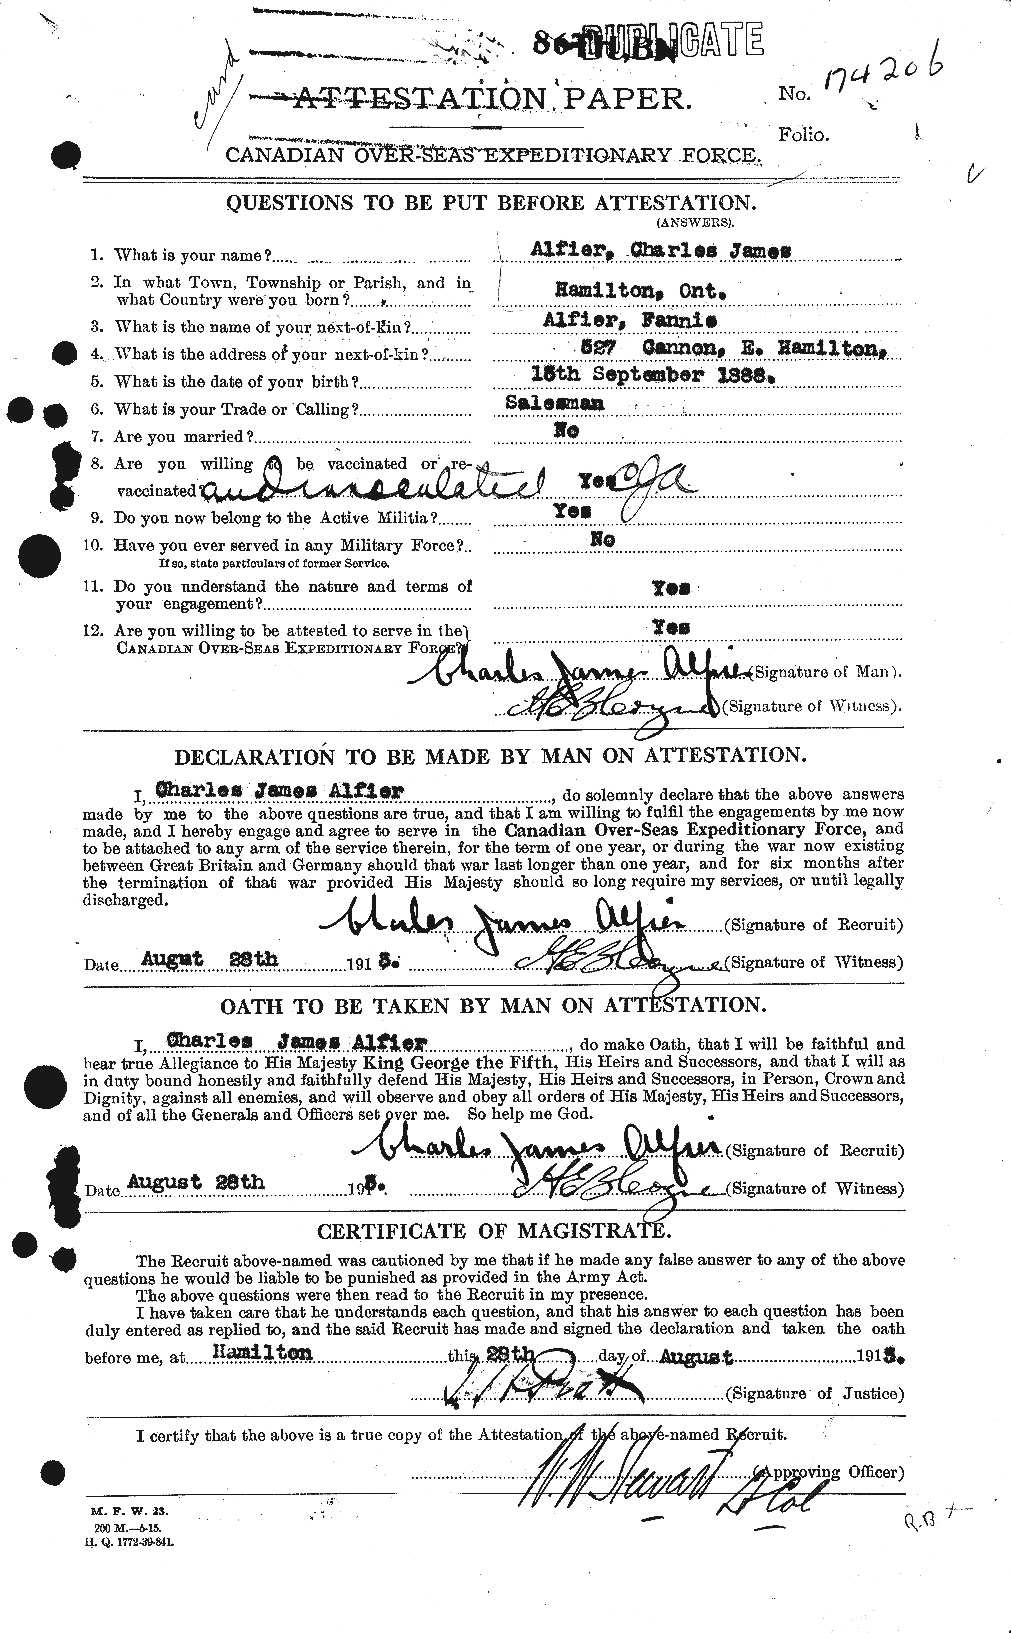 Personnel Records of the First World War - CEF 204474a